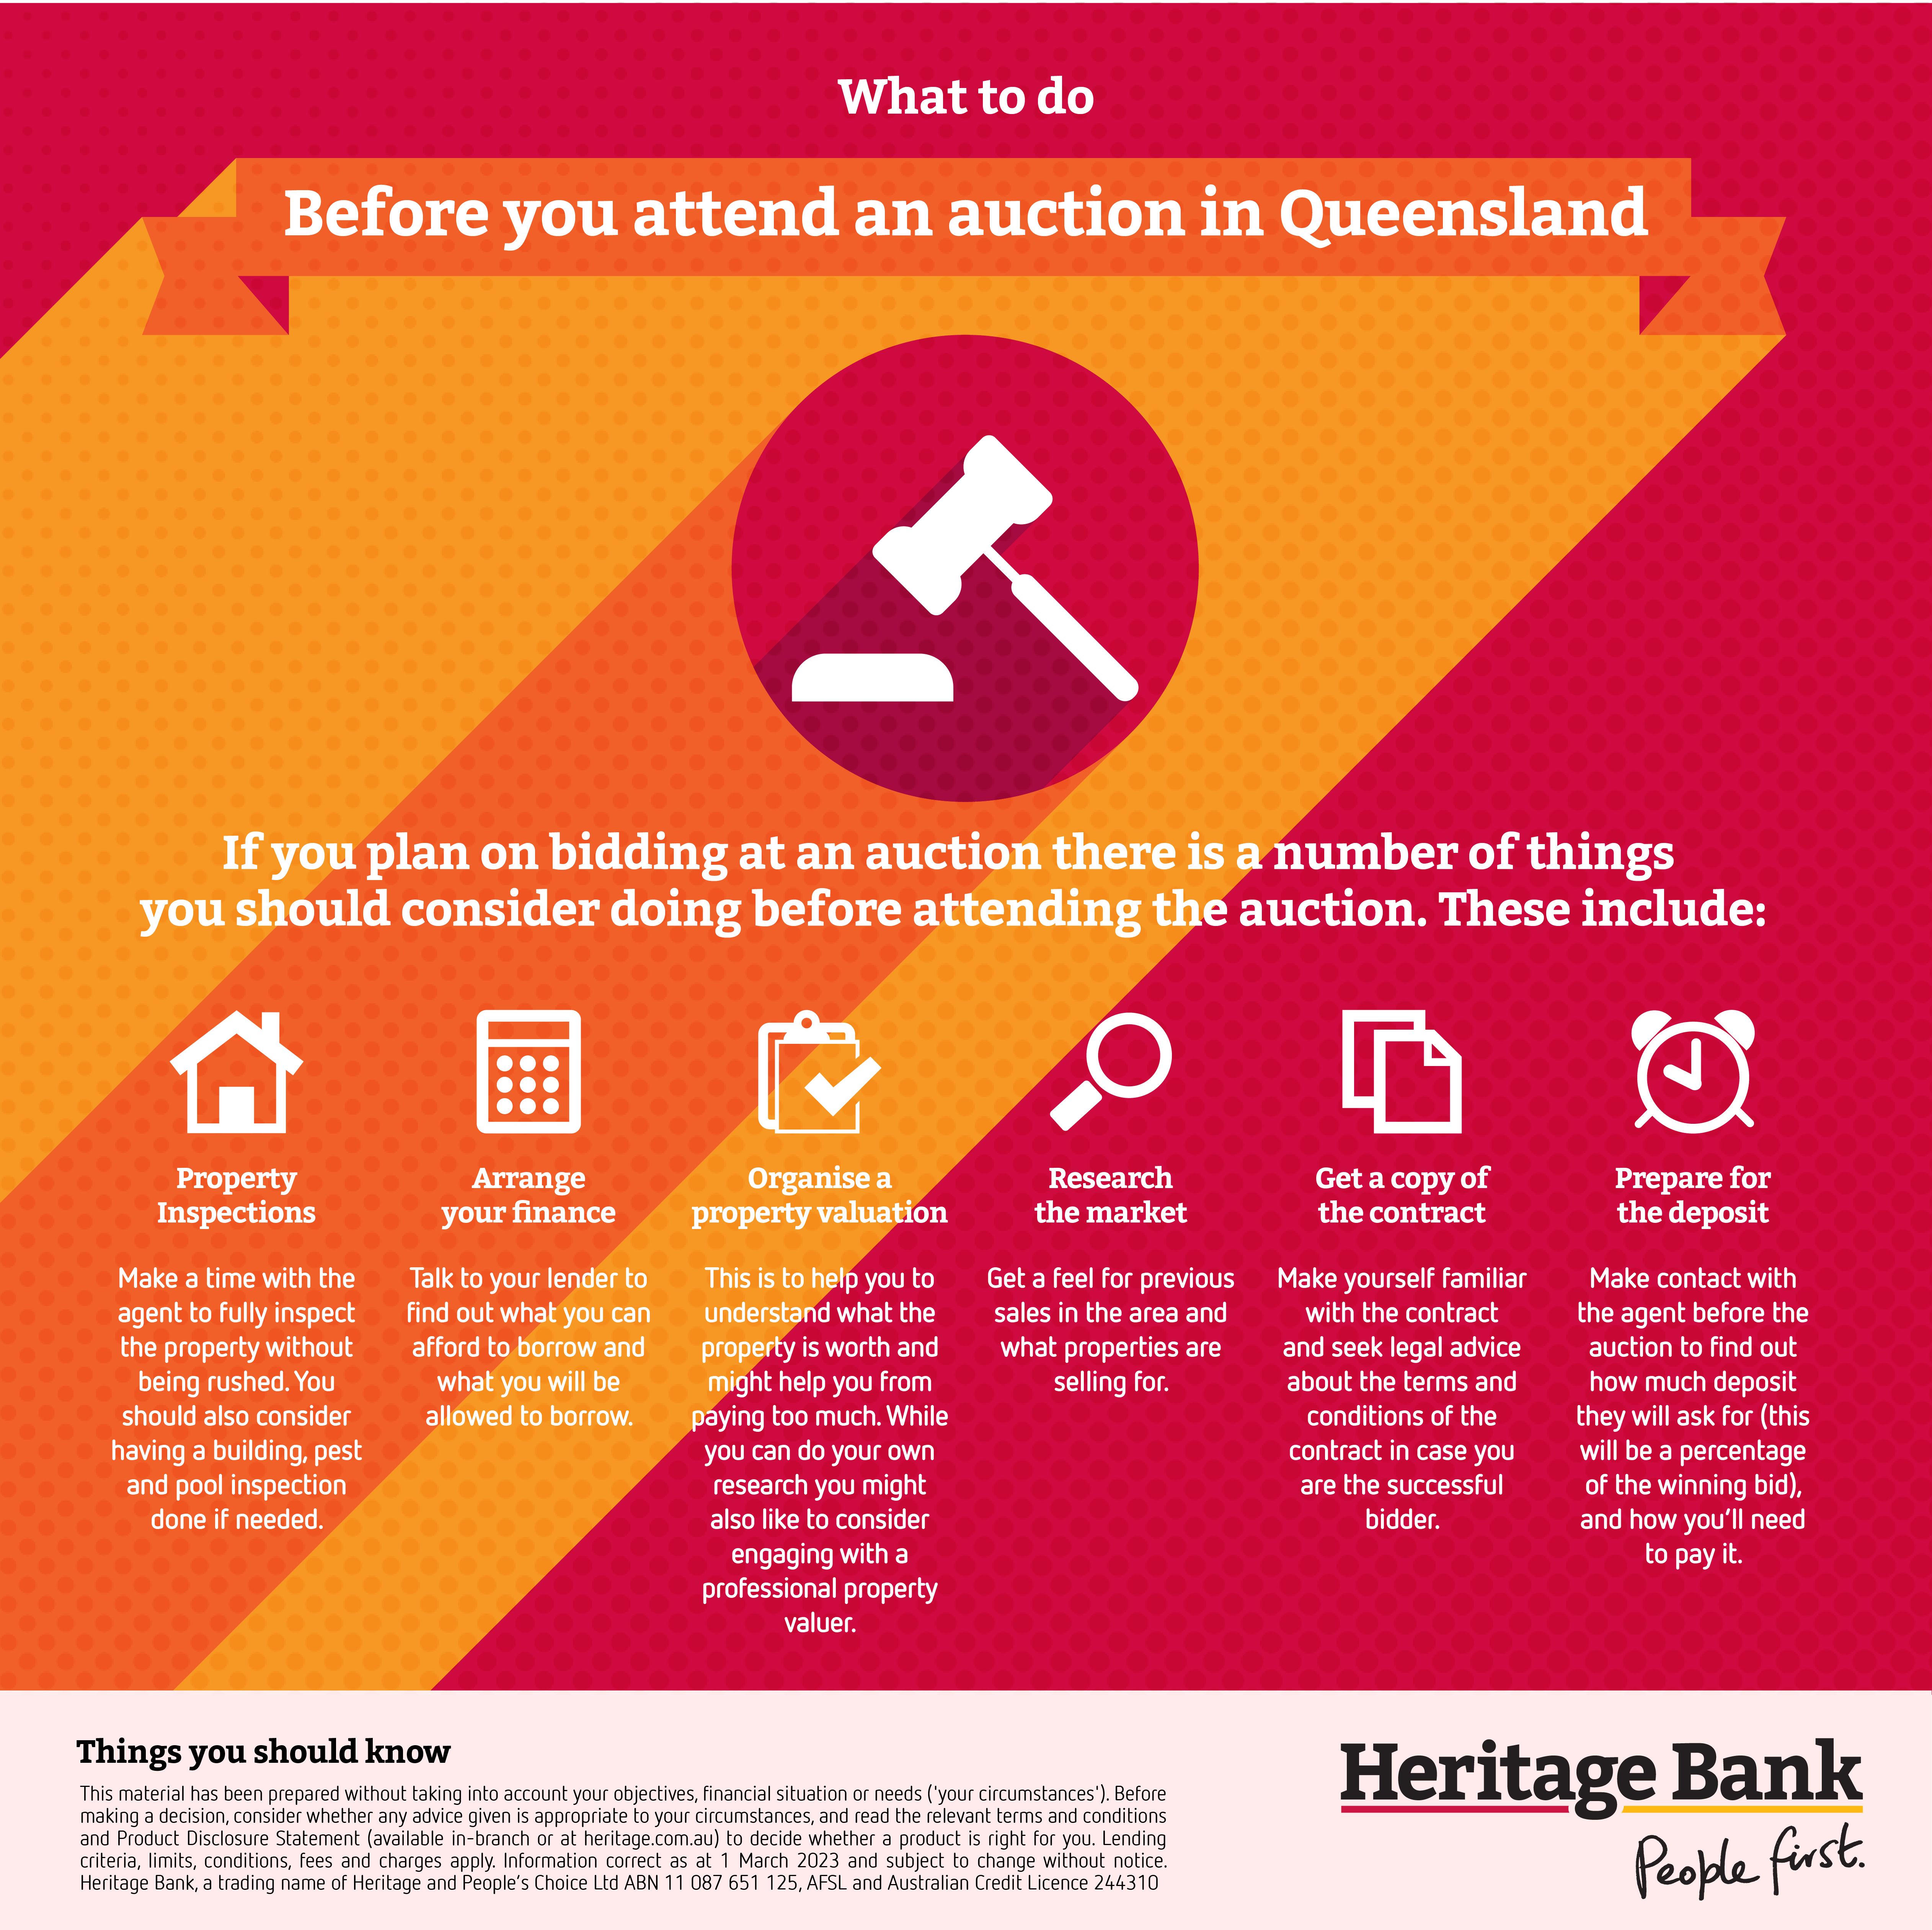 What to do before an auction - Heritage Bank infographic